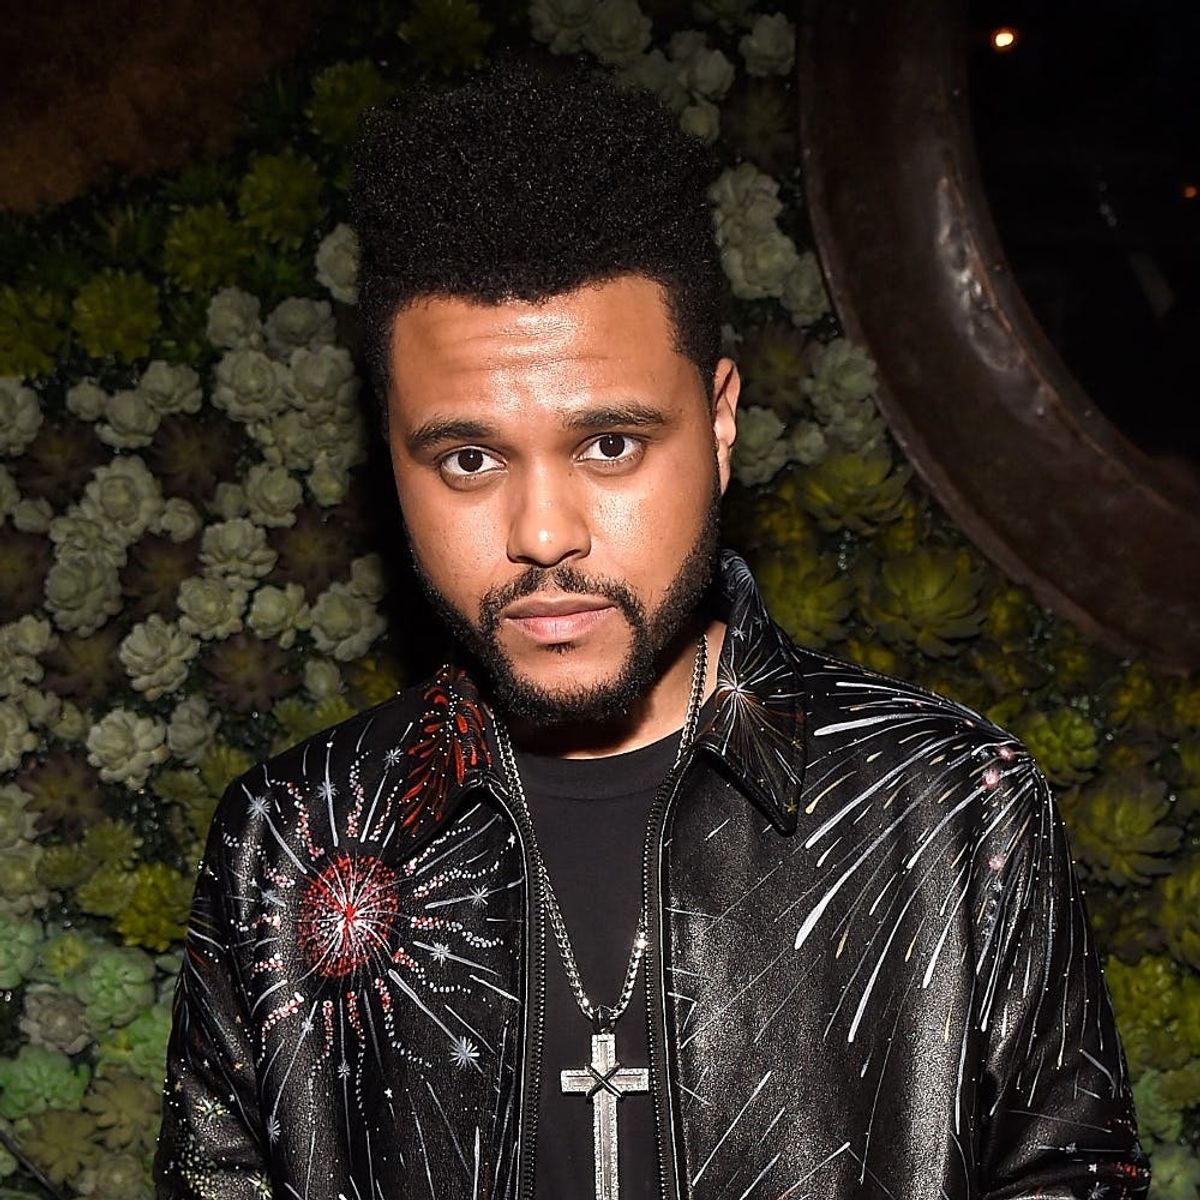 The Weeknd’s New Song Seems to Throw Nasty Shade at Justin Bieber During the Selena Gomez Love Triangle